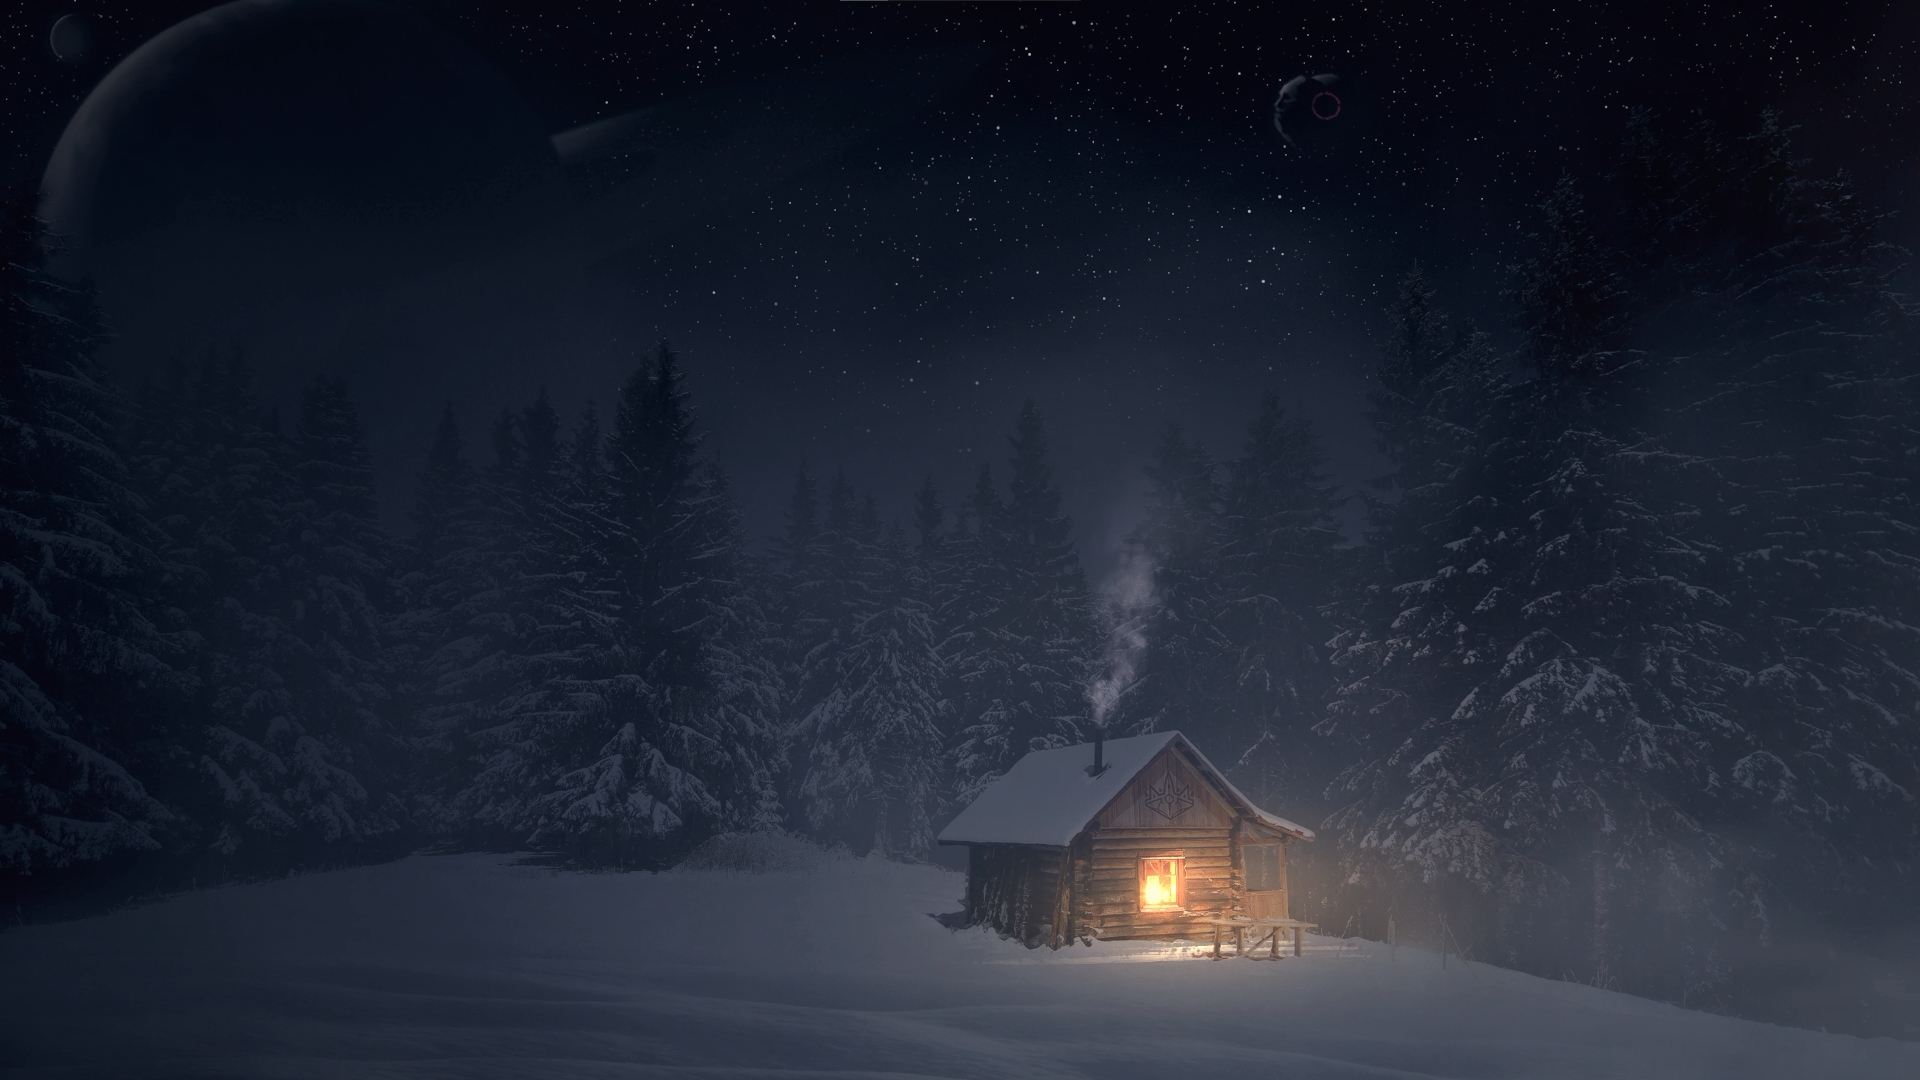 General 1920x1080 cabin snow isolated forest digital art low light trees stars snow covered smoke night sky nature